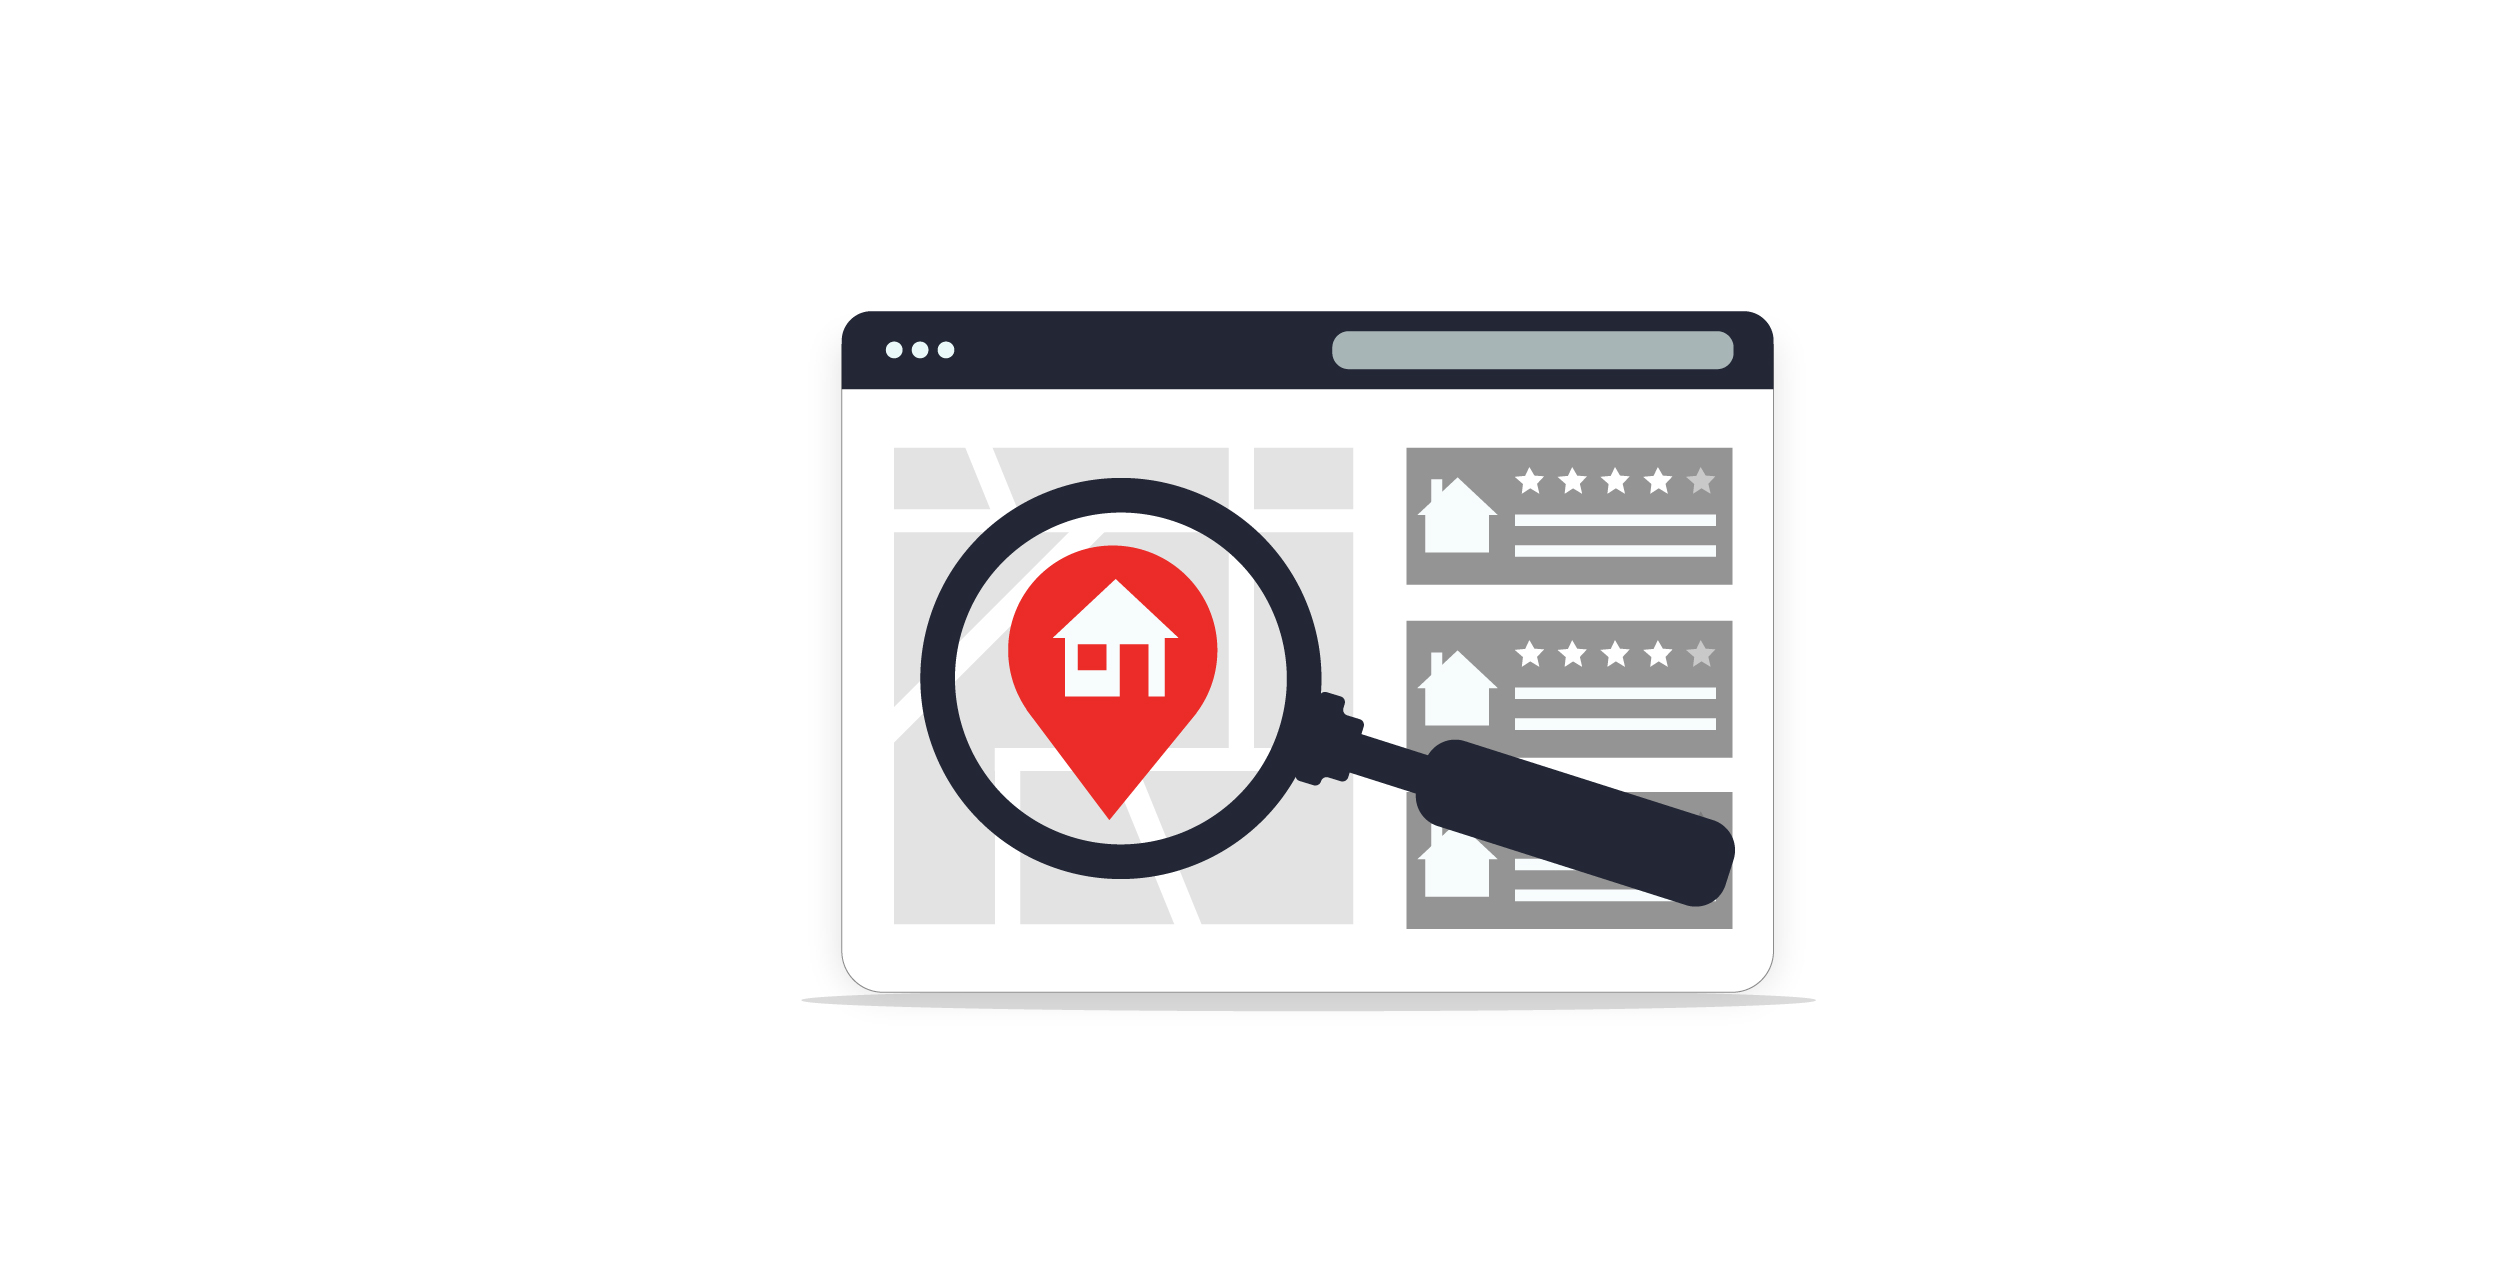 Real Estate Websites for Scraping Data